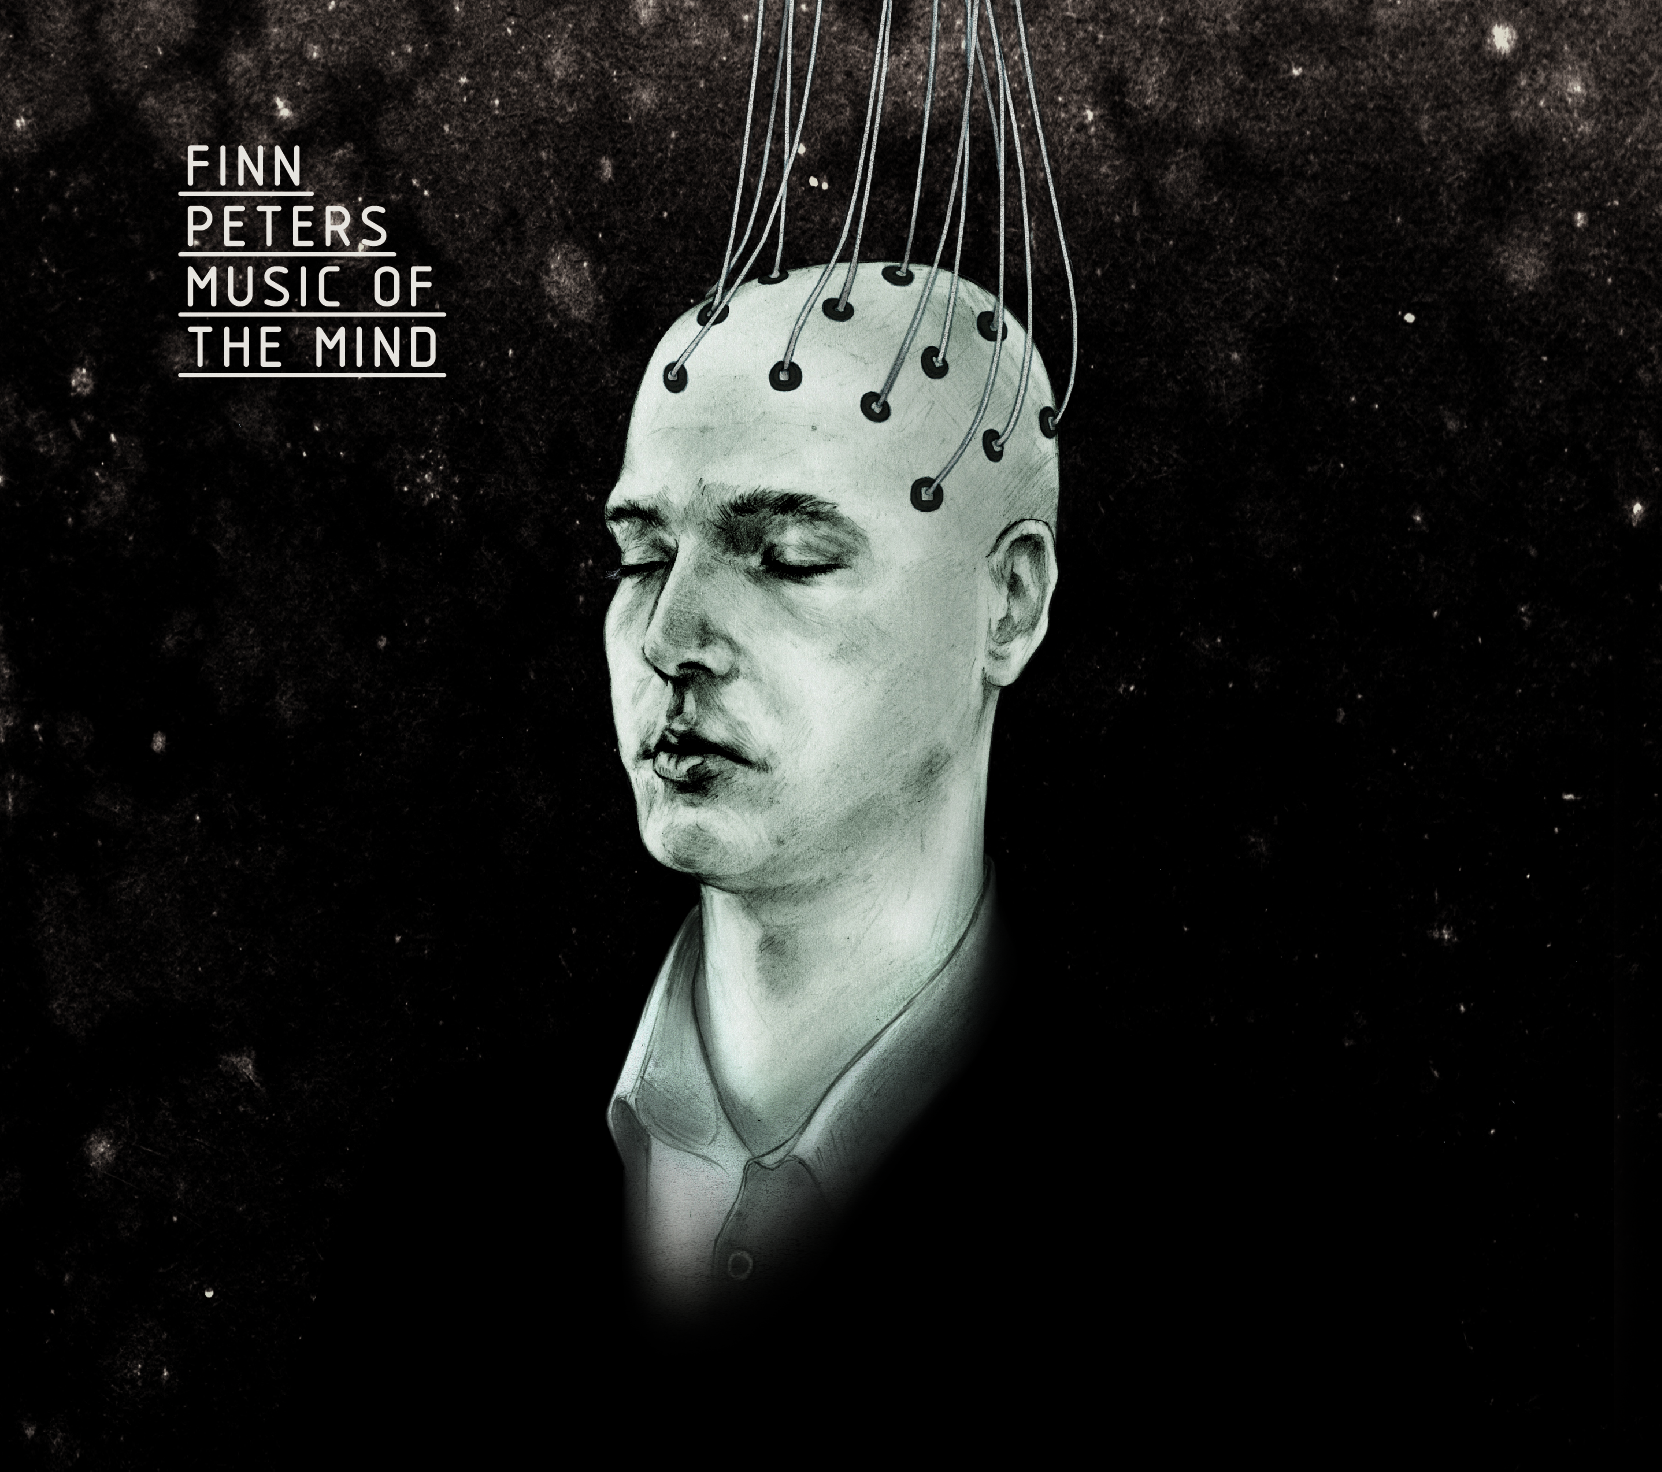 The cover art of the *Music of the Mind* release. Image courtesy of Finn Peters and Finn Notman (visual artist).